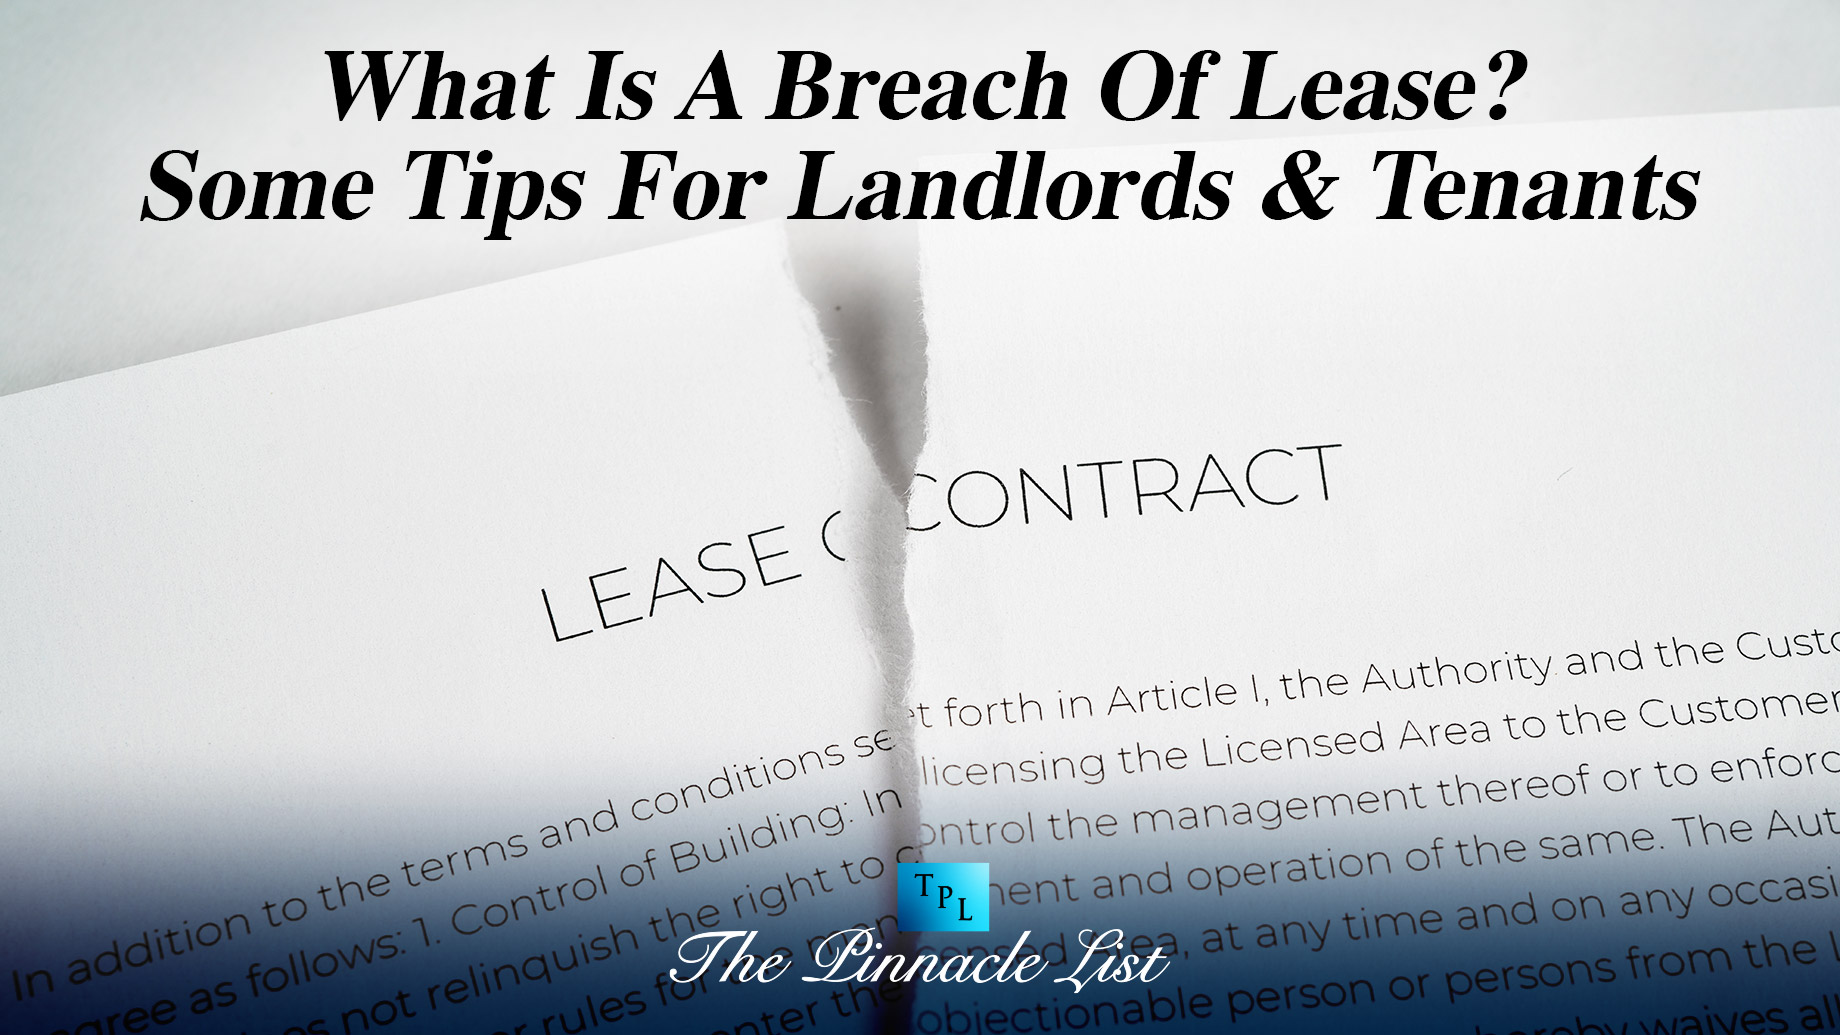 What Is A Breach Of Lease? Some Tips For Landlords & Tenants